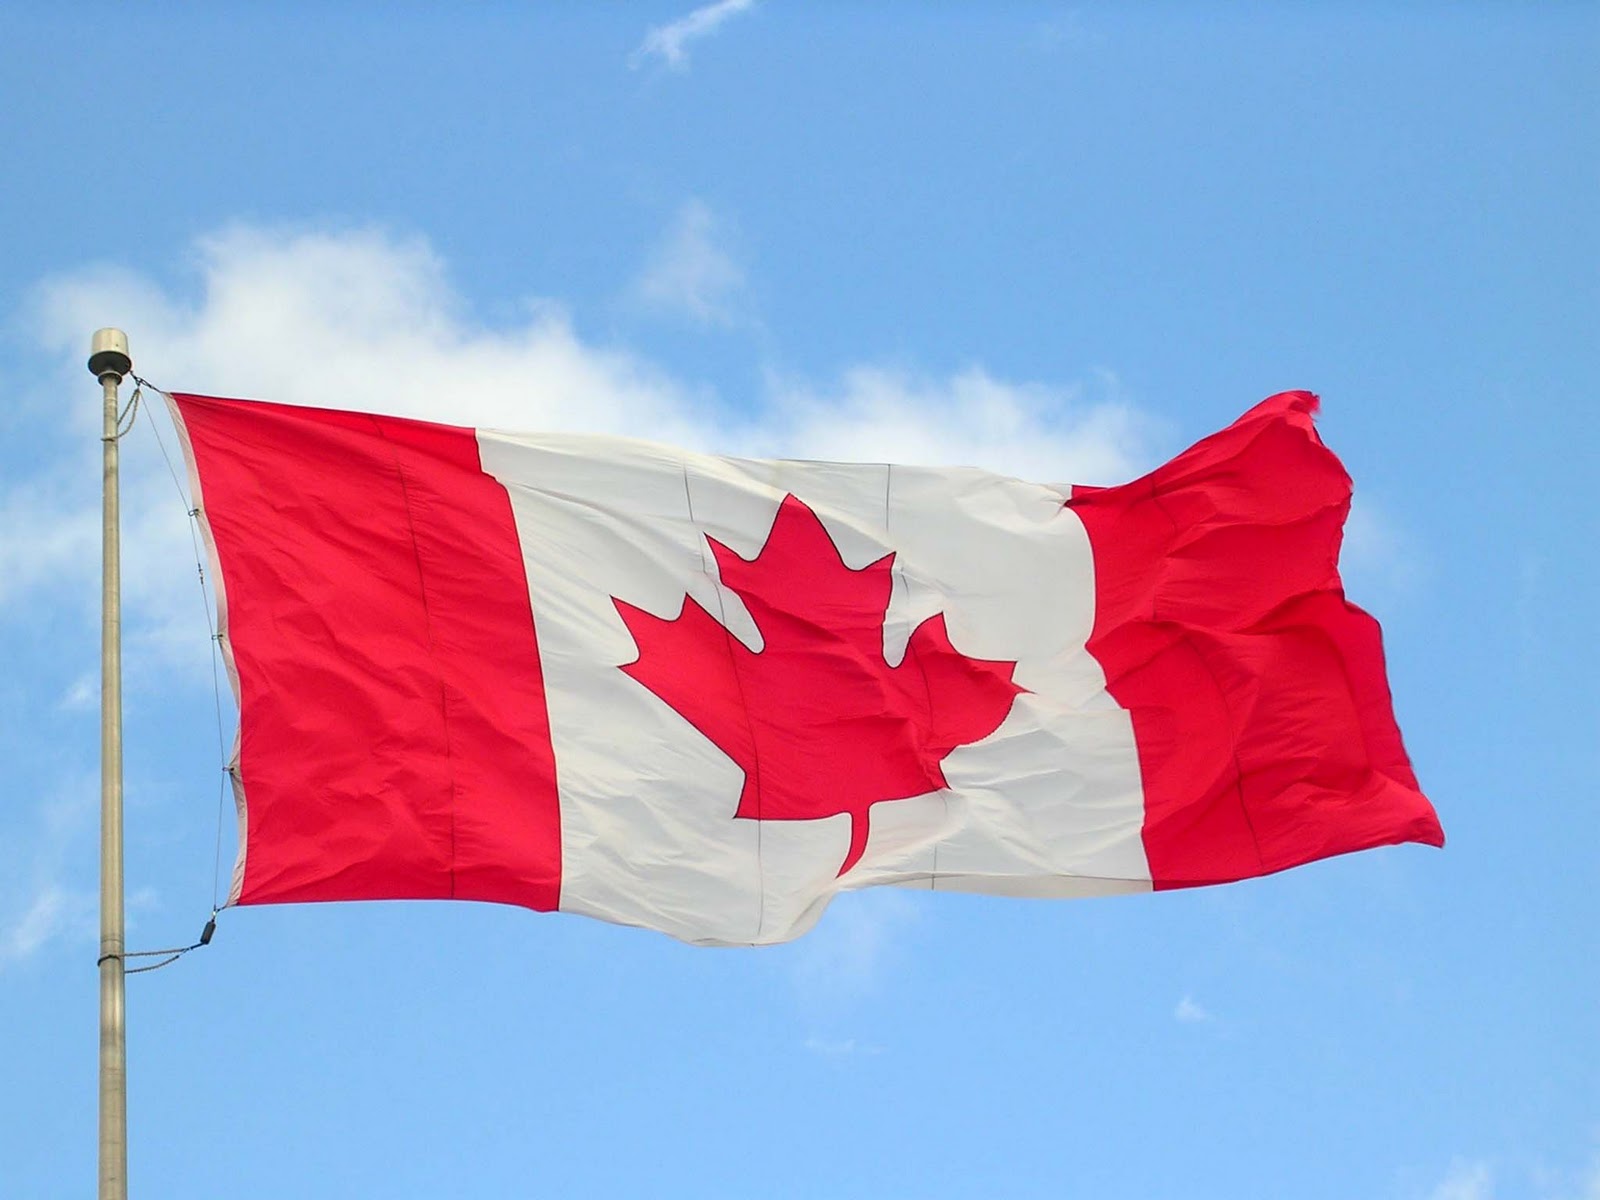 21 Ways Canadian Health Care Is Better than Obamacare